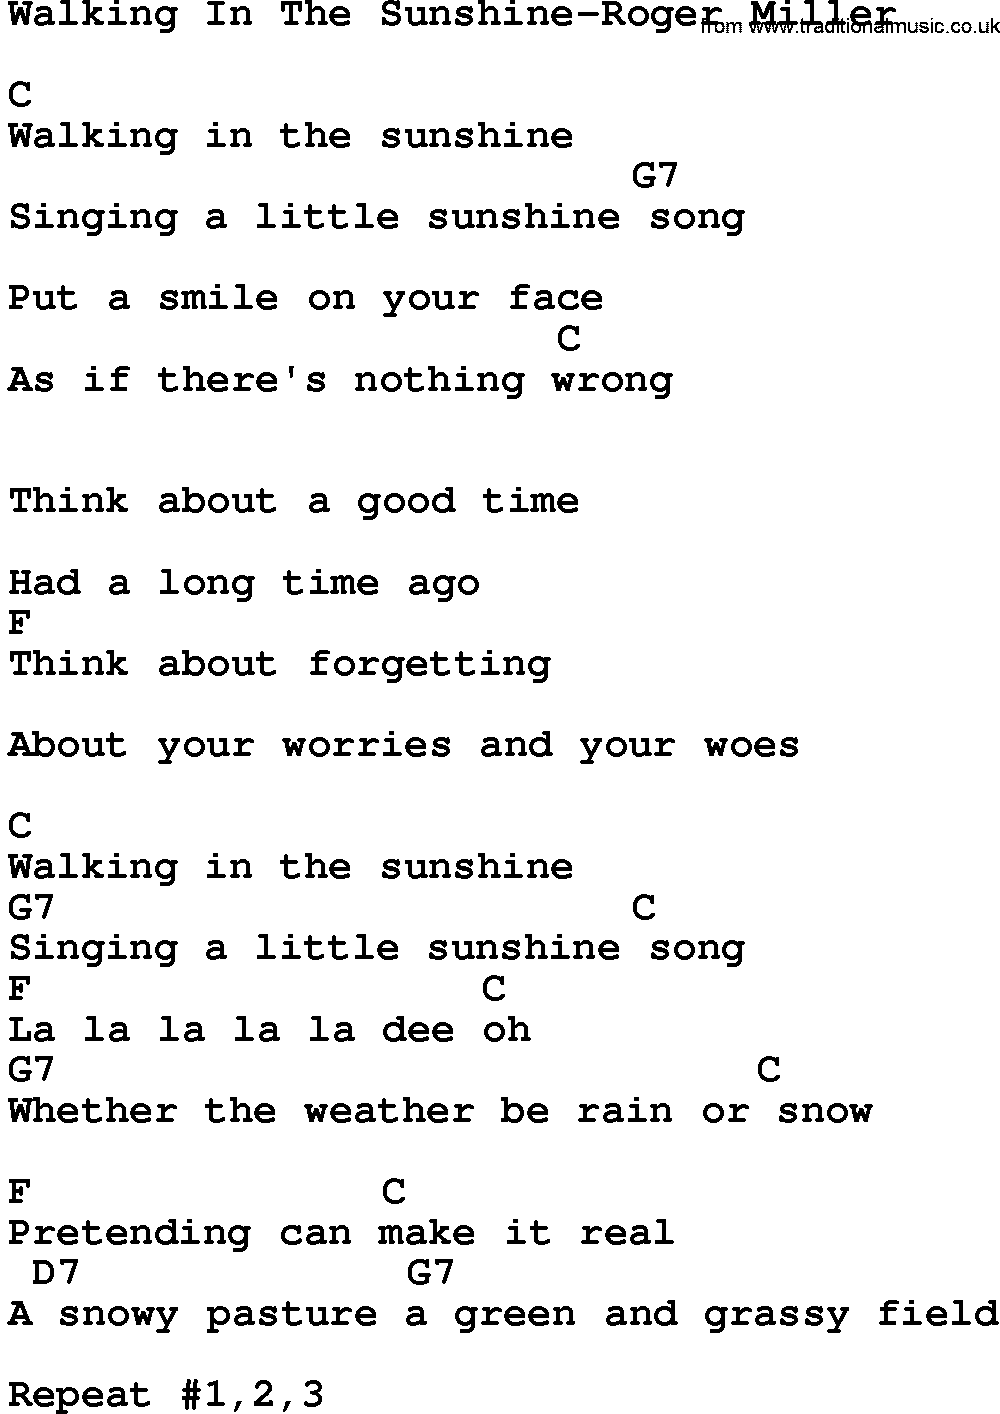 Country music song: Walking In The Sunshine-Roger Miller lyrics and chords